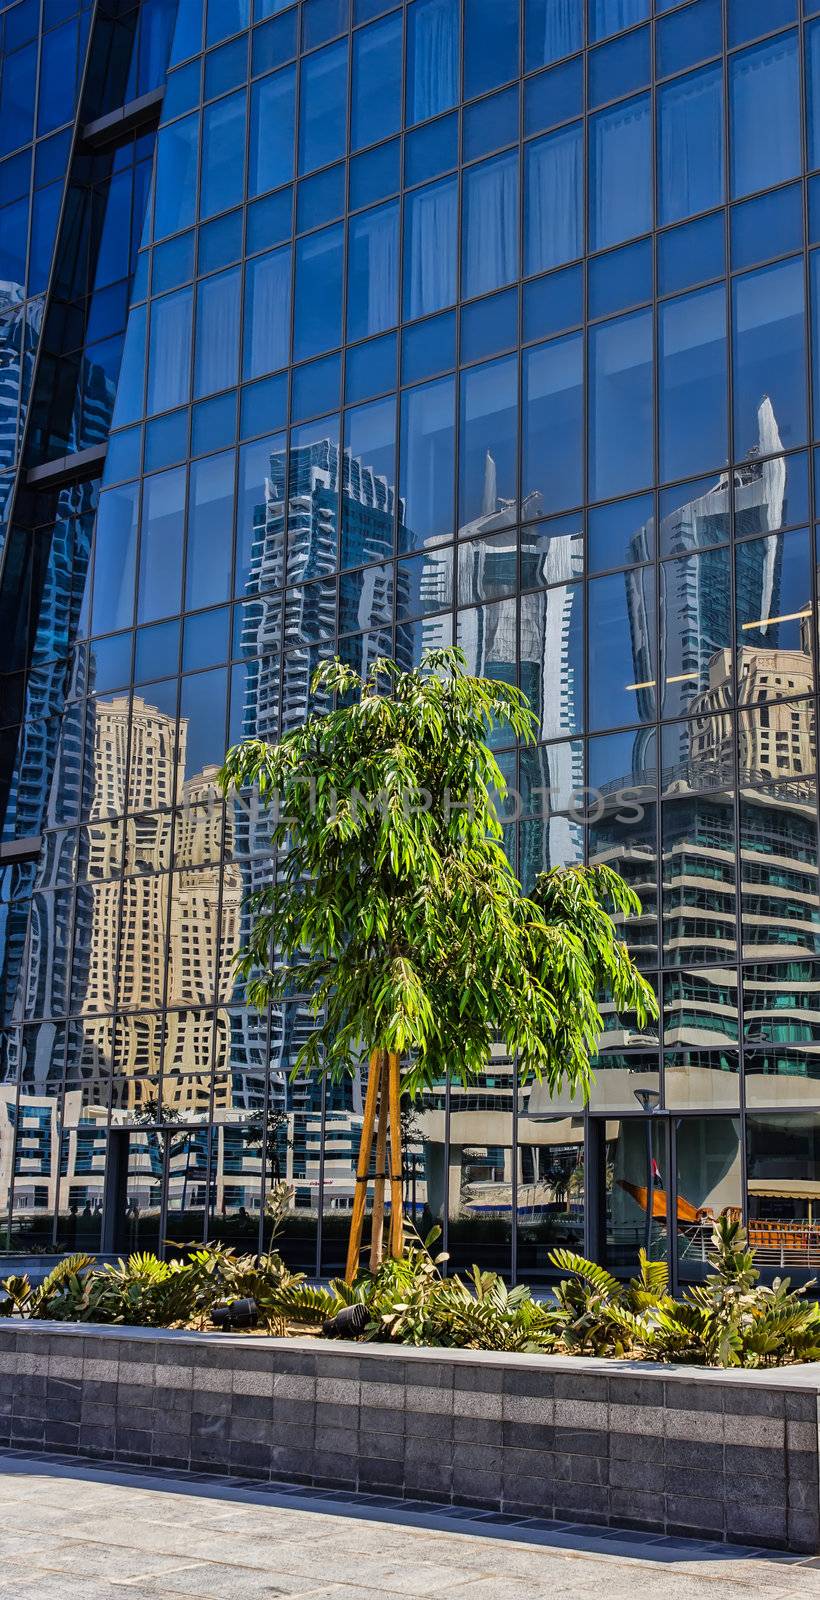 Tree on a background of reflections in the mirrored glass of a large building